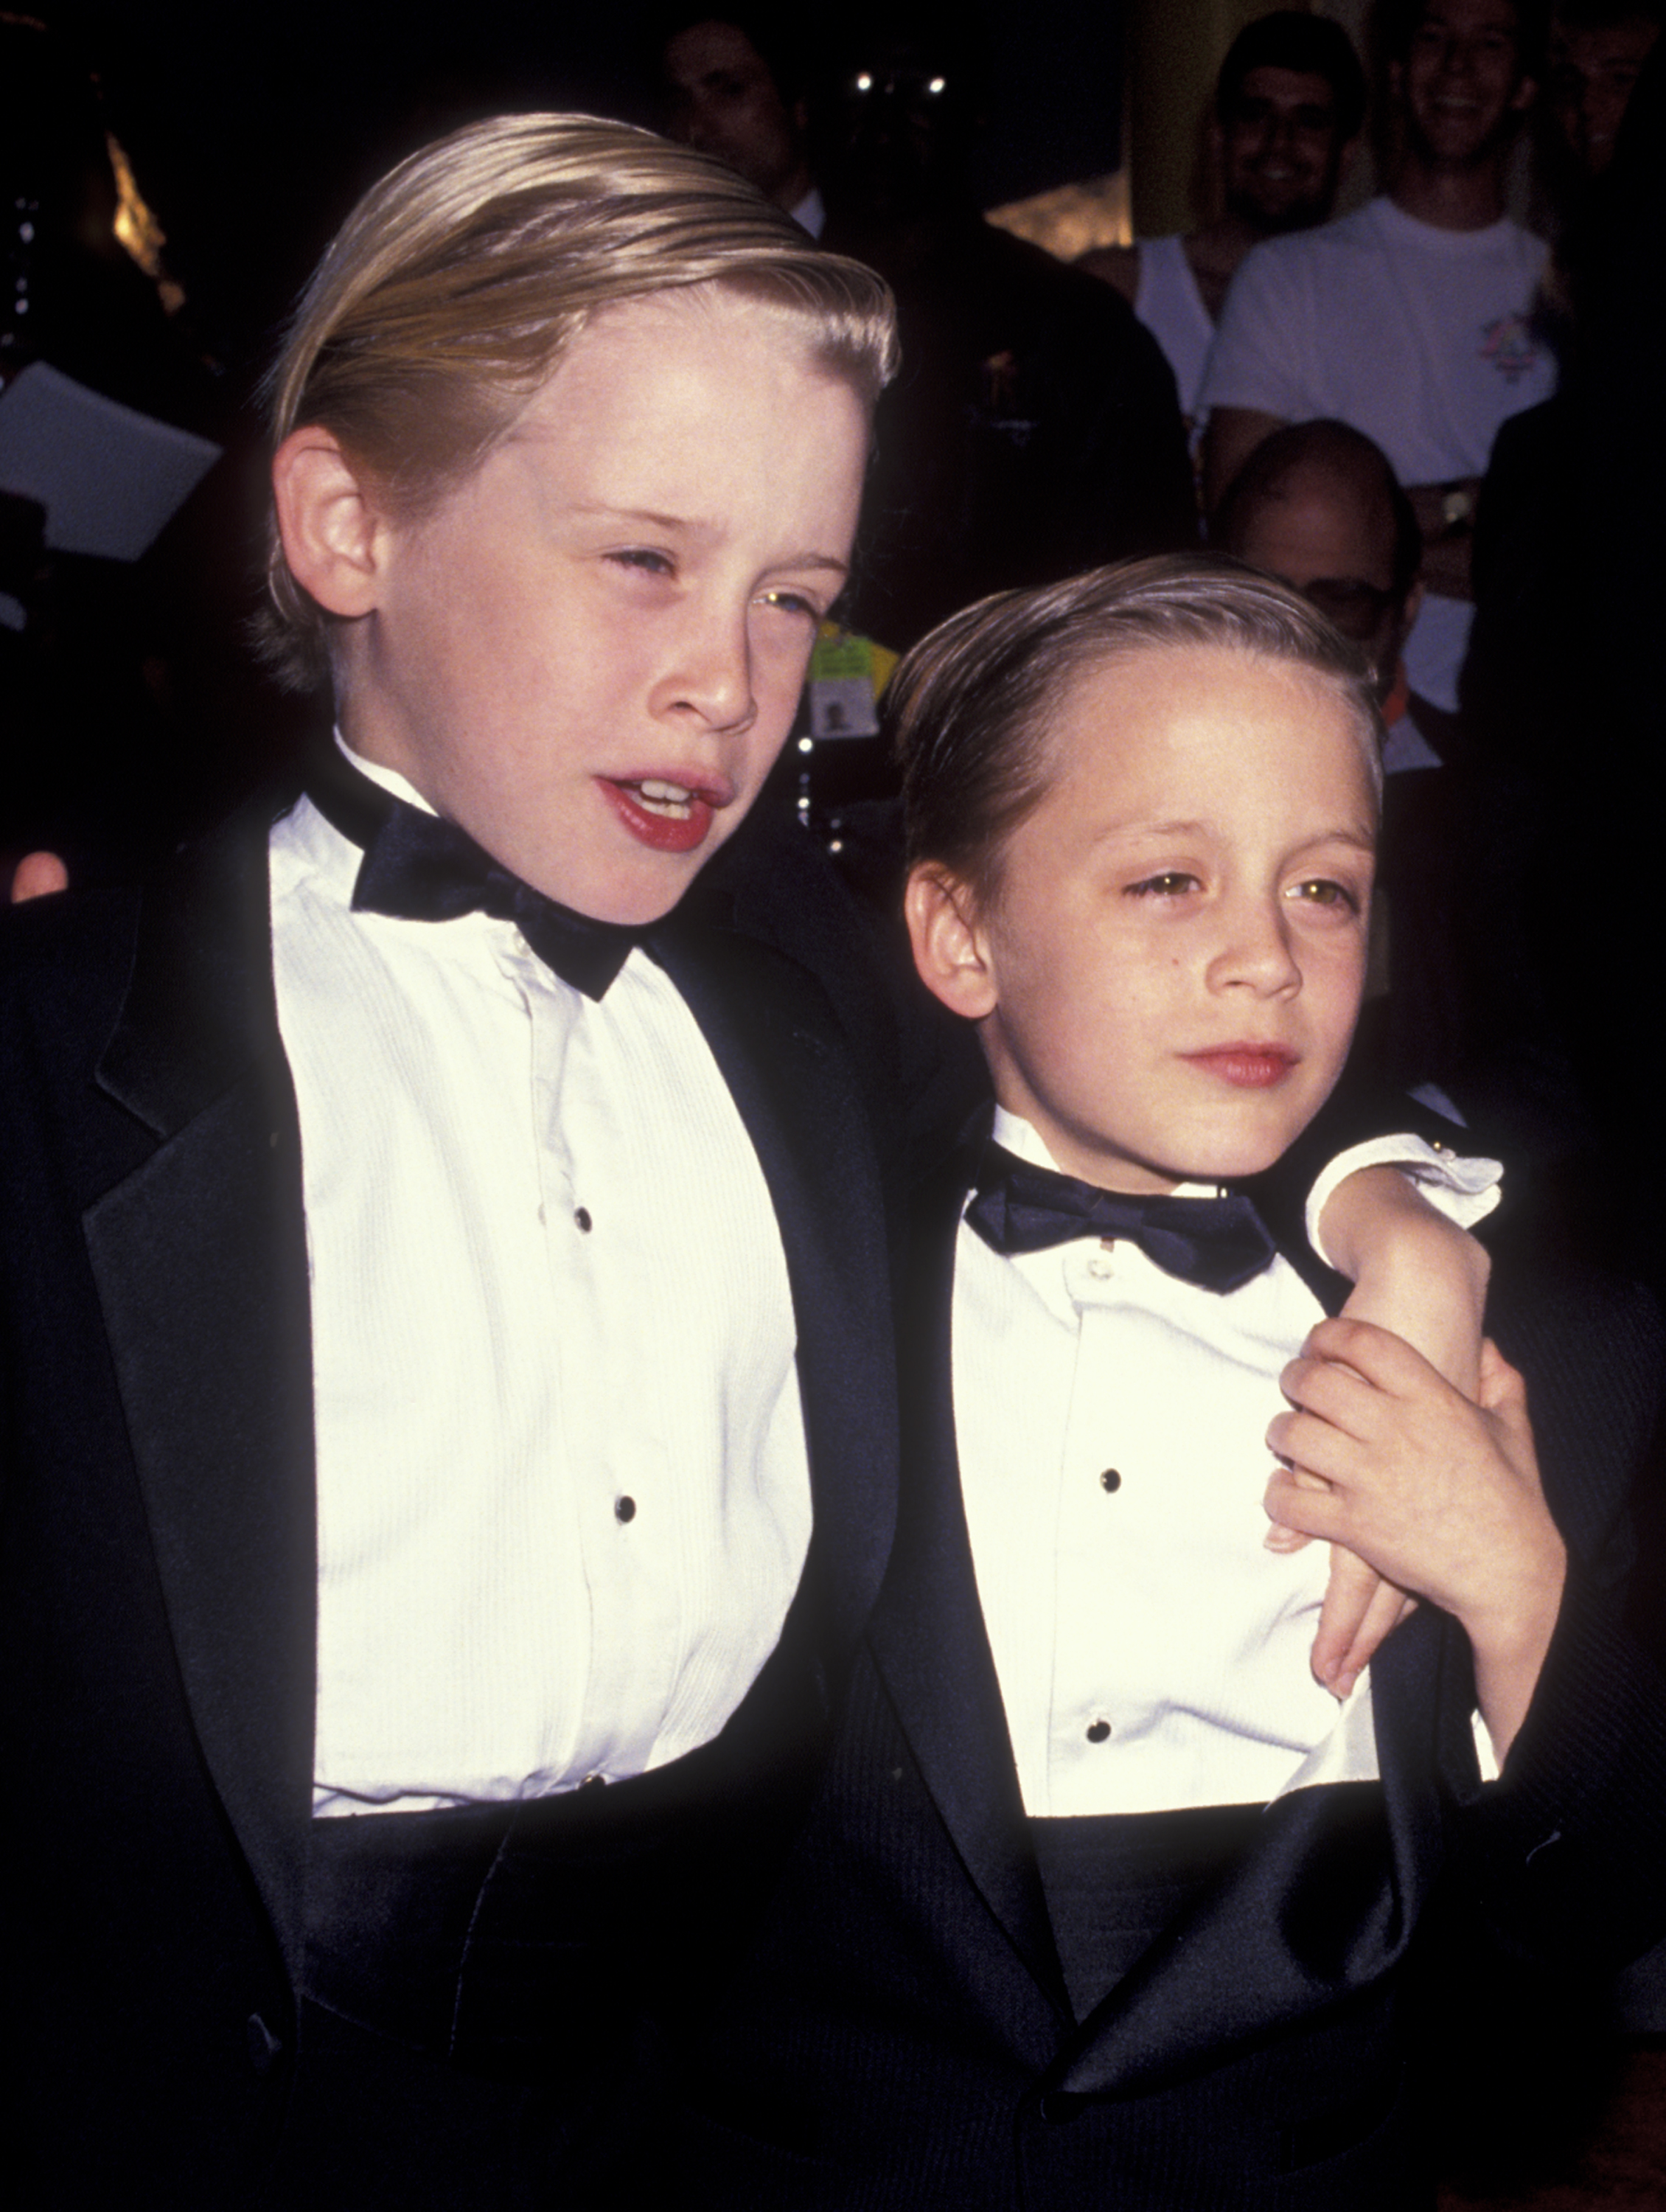 Macaulay Culkin and Kieran Culkin attend the Fifth Annual American Comedy Awards on March 9, 1991 in Los Angeles, California | Source: Getty Images